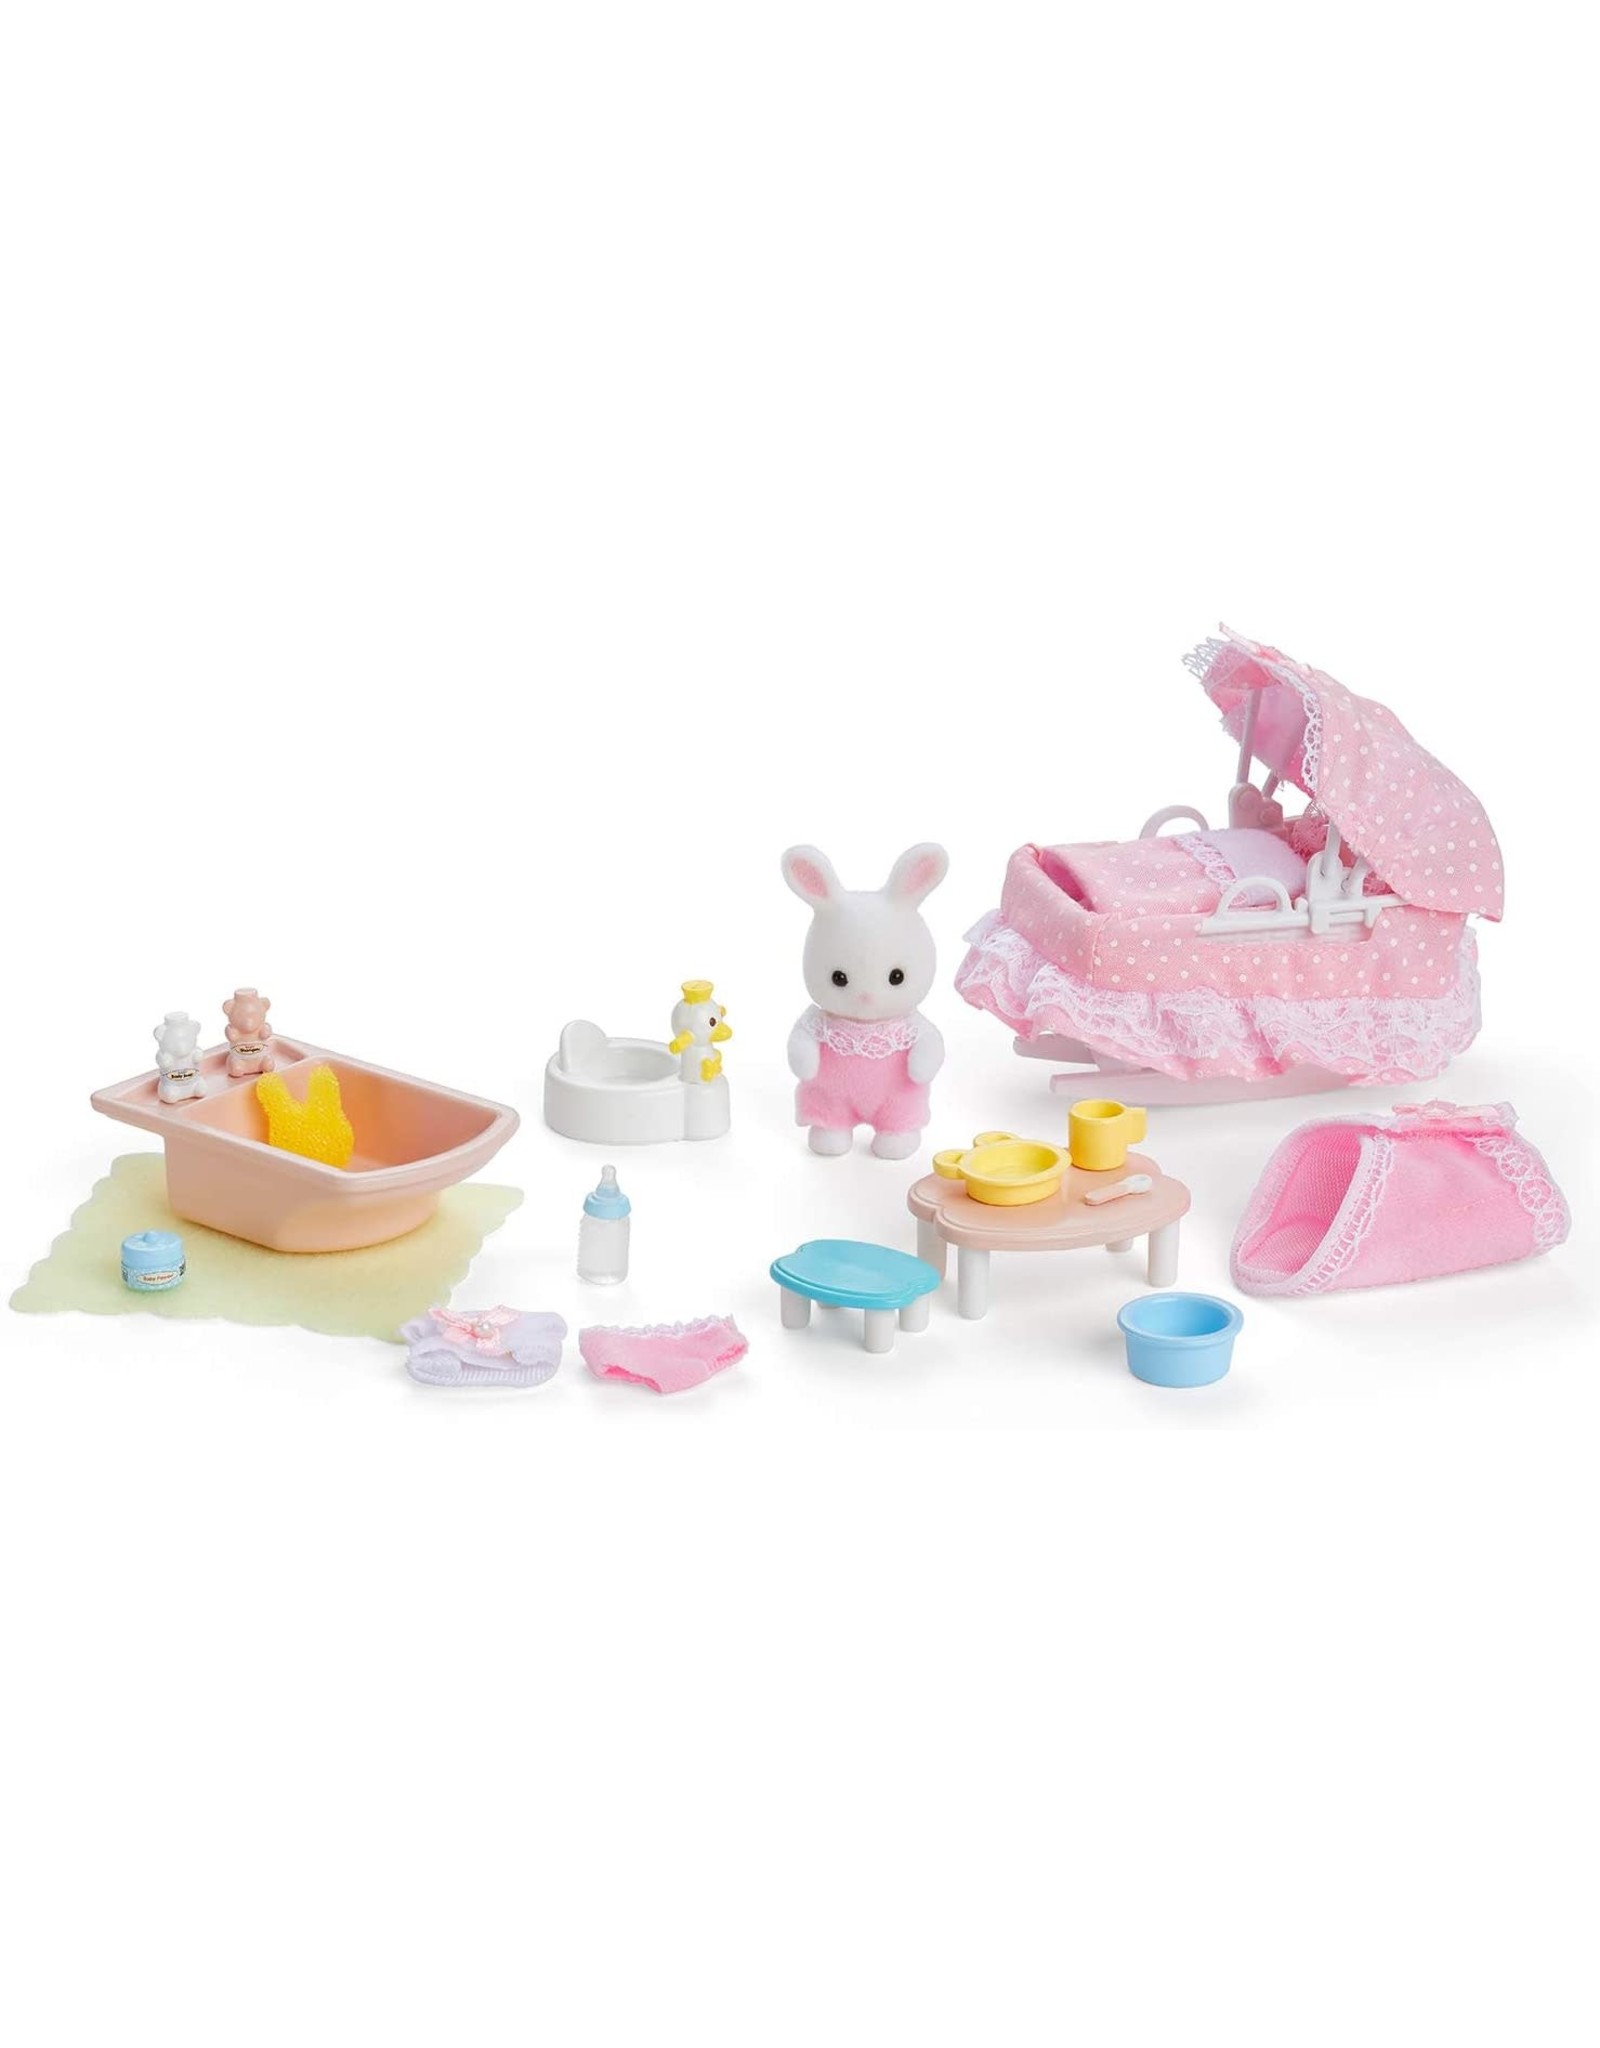 Calico Critters Sophie's Love 'N Care